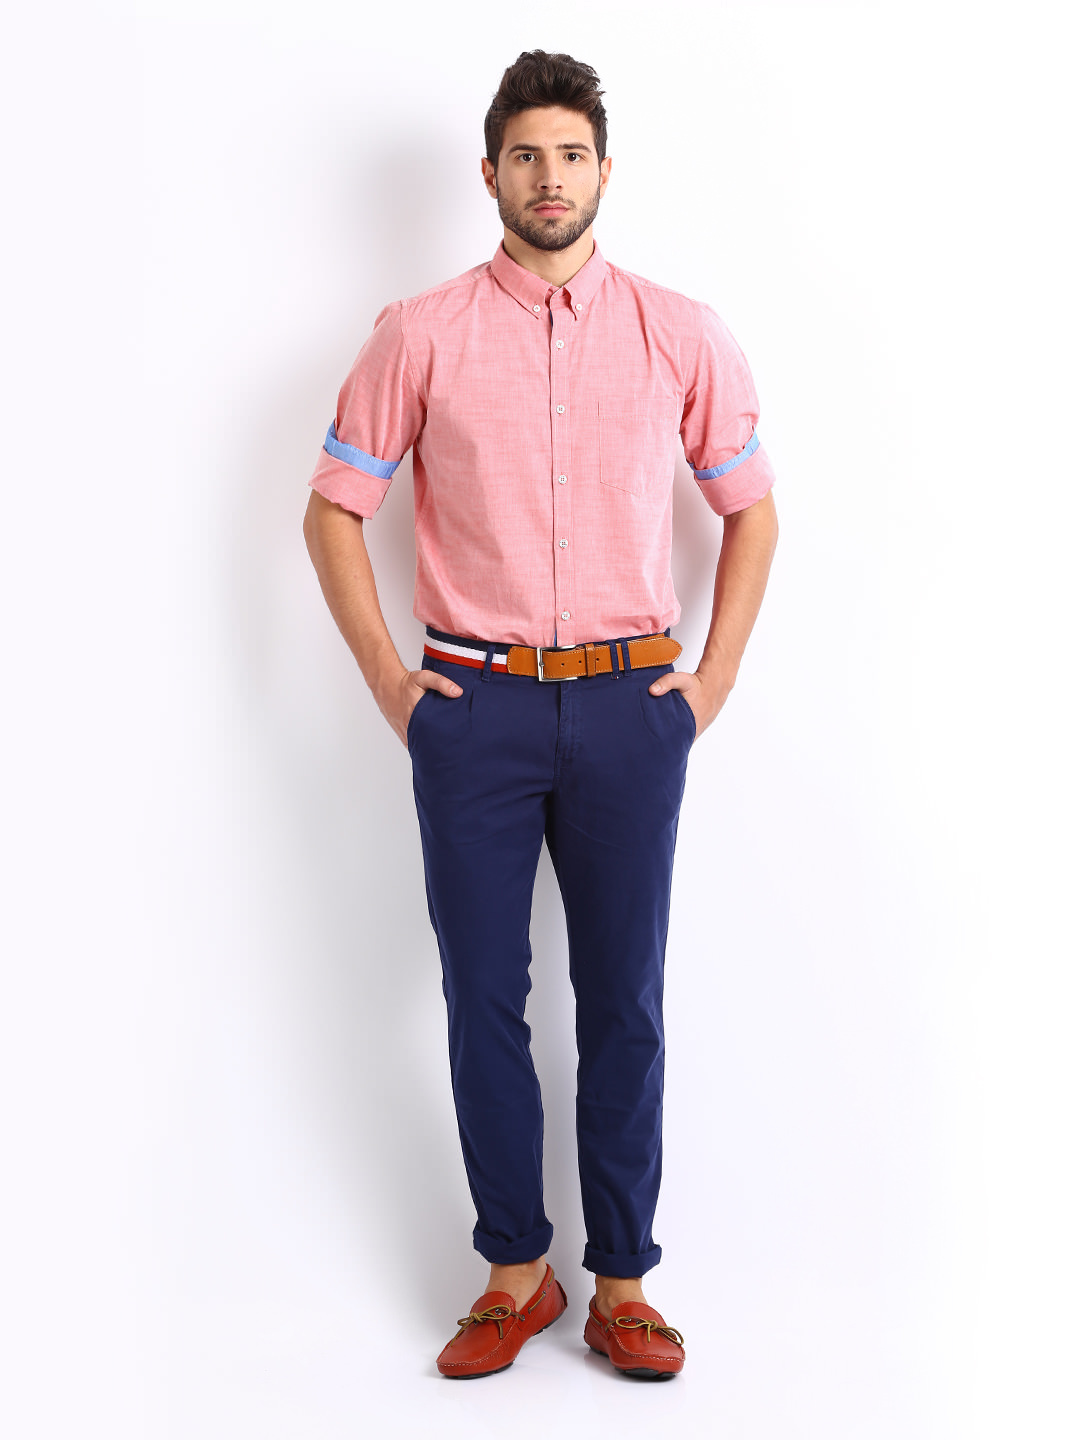 Getting the casual pink shirt for men